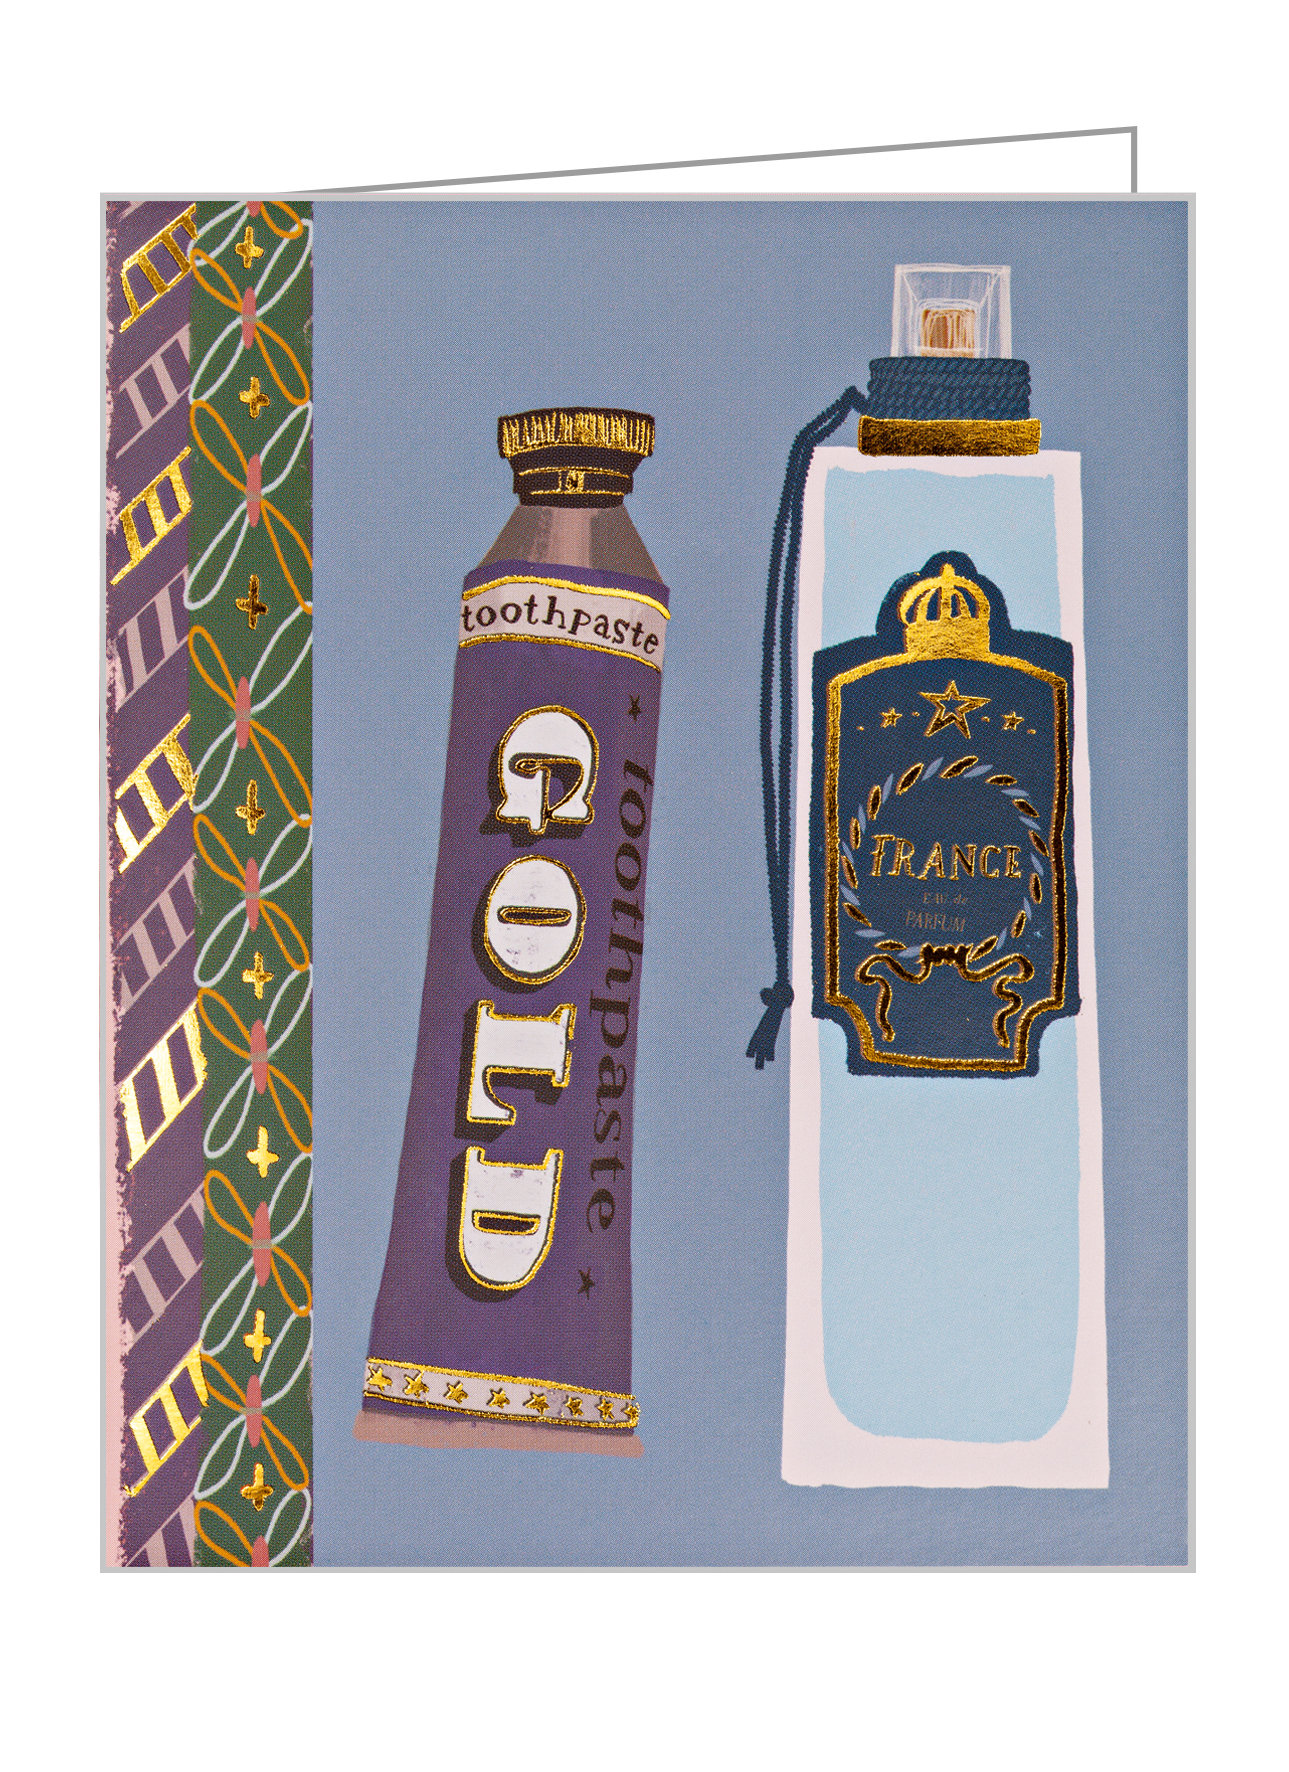 Anisa Makhoul's Belle Époque design with perfume bottles, to notecard, by teNeues Stationery.